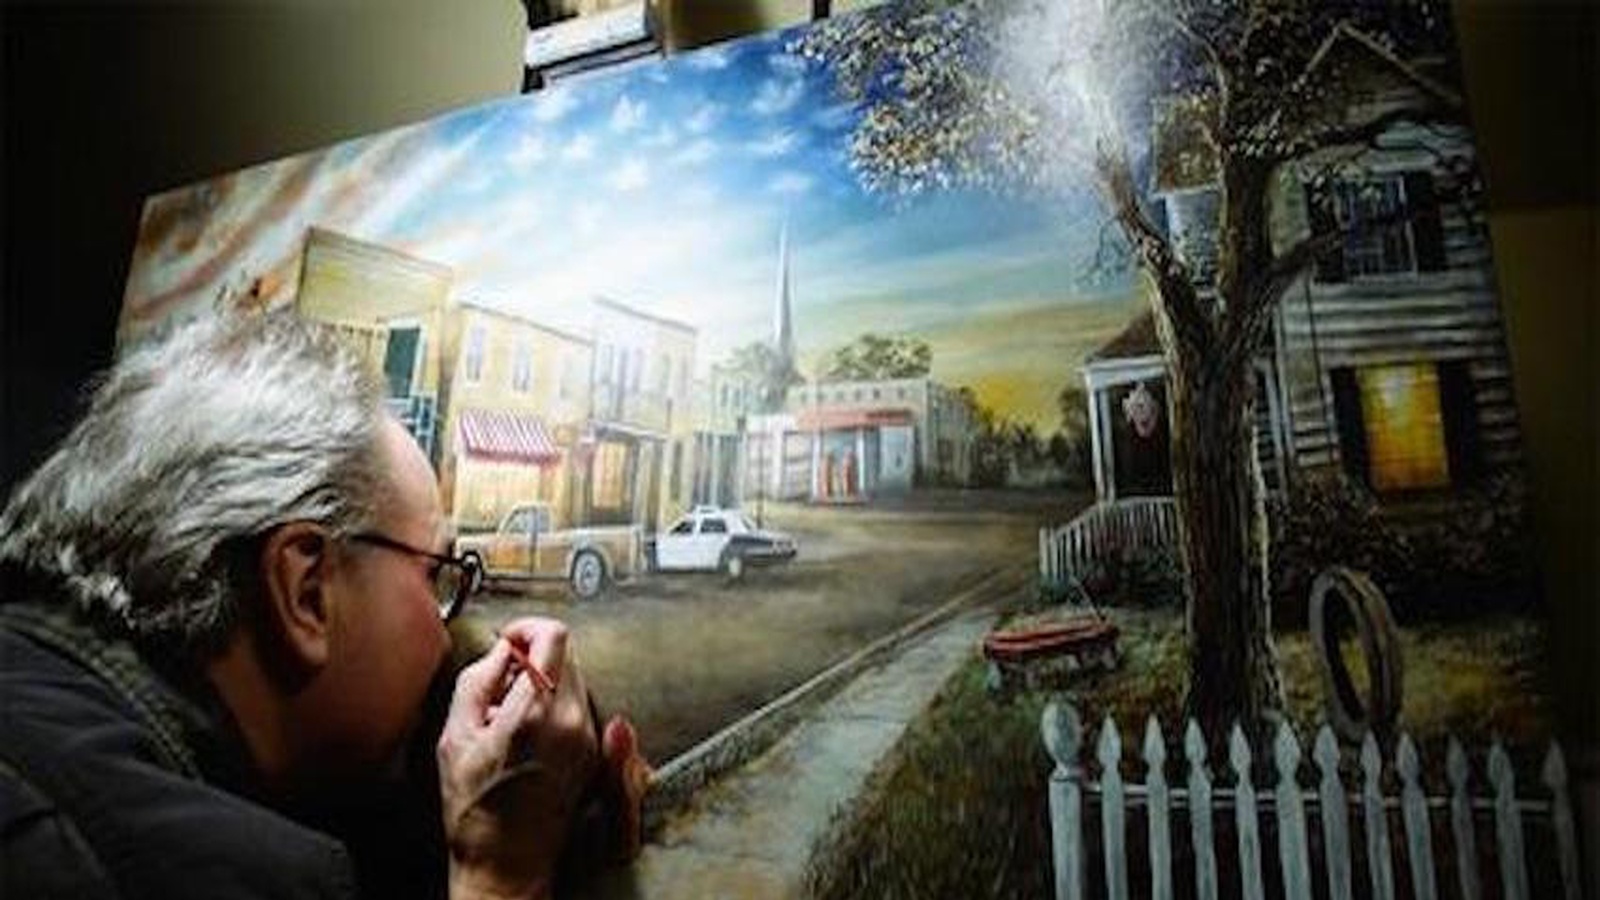 Seeing Is Believing: The Story of Acclaimed Artist Who is Legally Blind